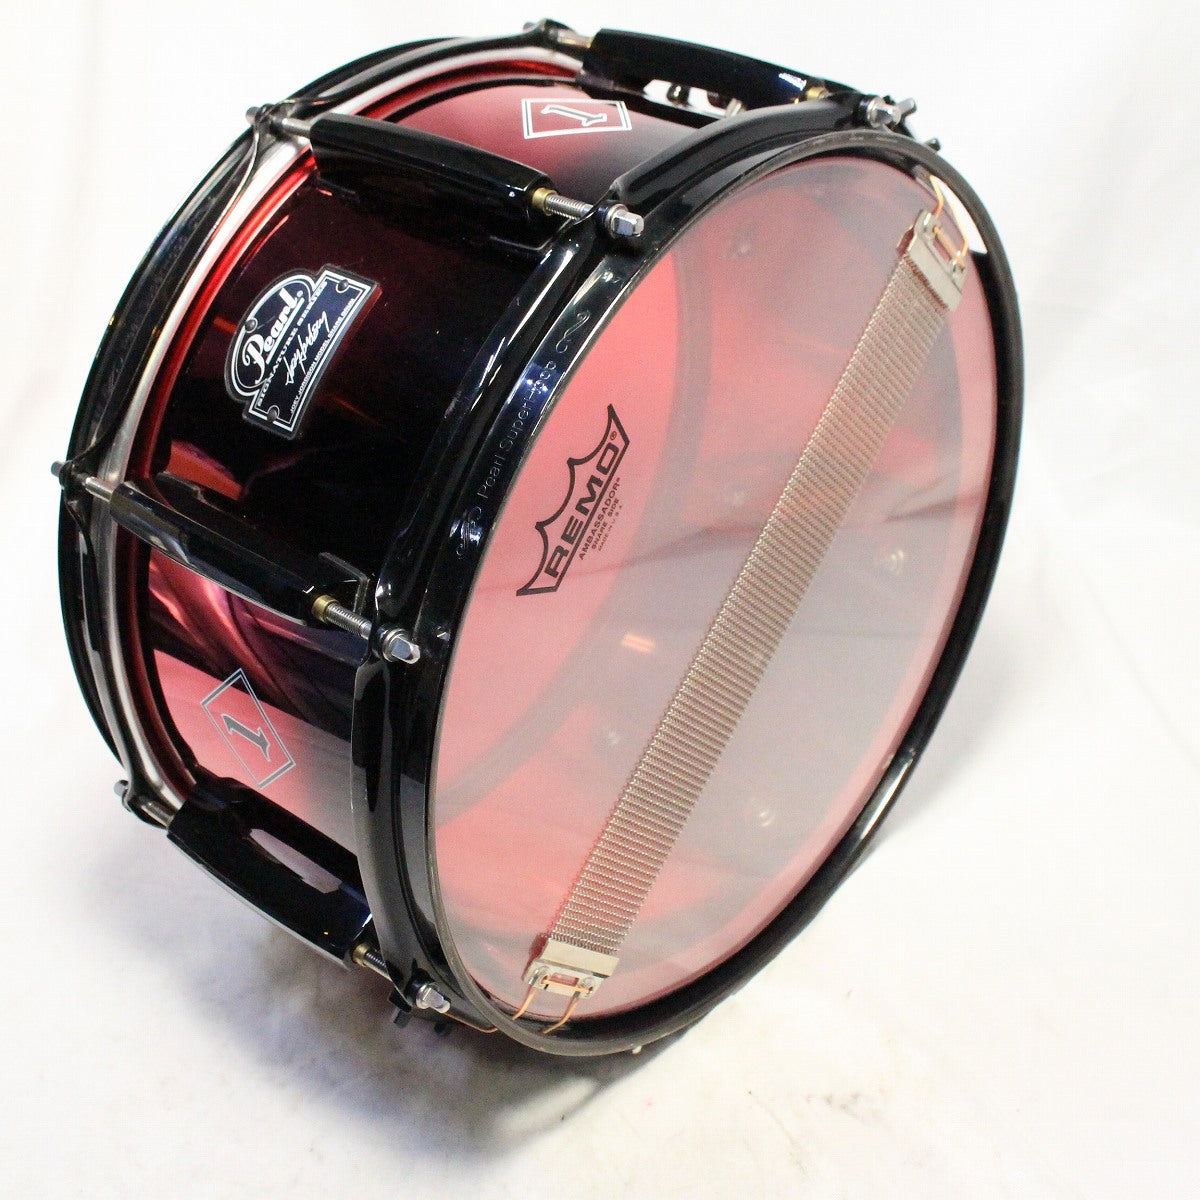 USED PEARL / JJ1365RD Joey Jordison Signature Snare Limited RED Edition 13x6.5 [08]